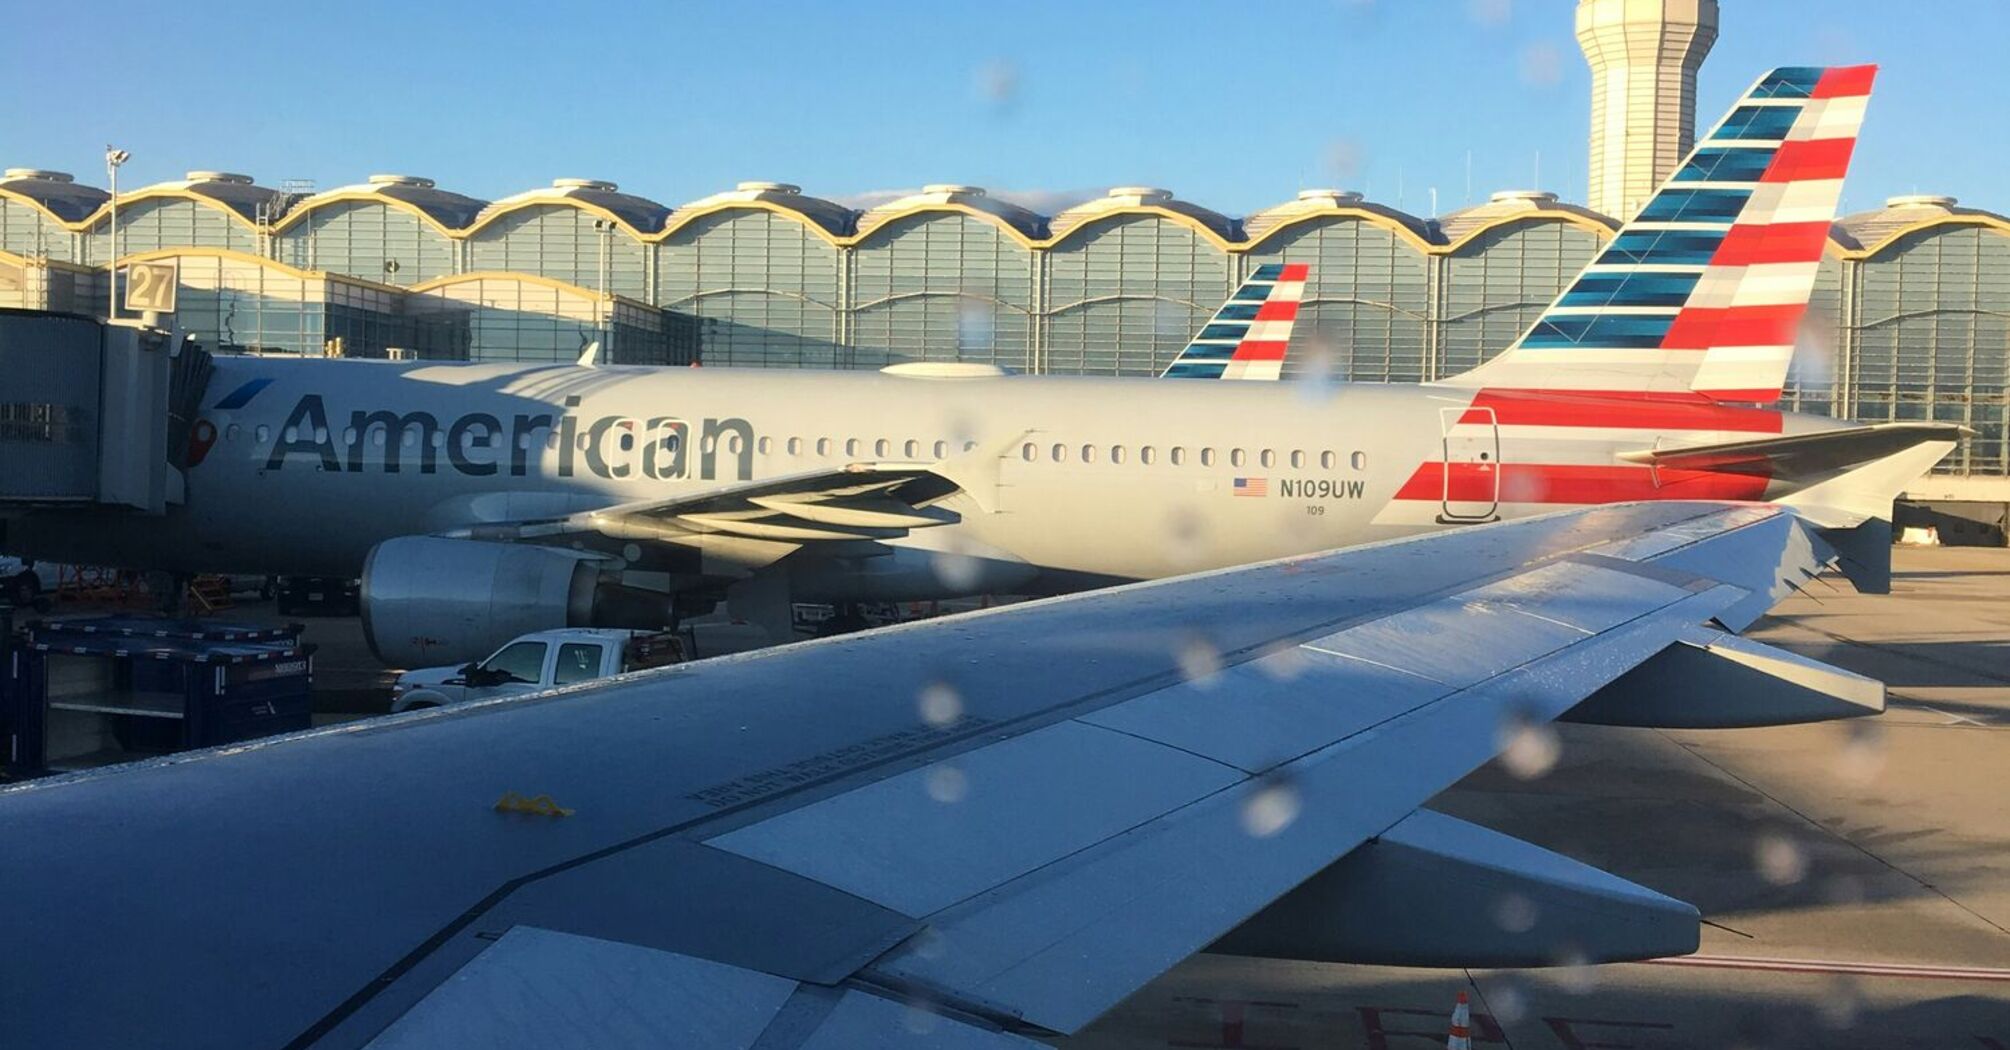 American Airlines flight to Spain made an emergency landing due to a crack in the windshield